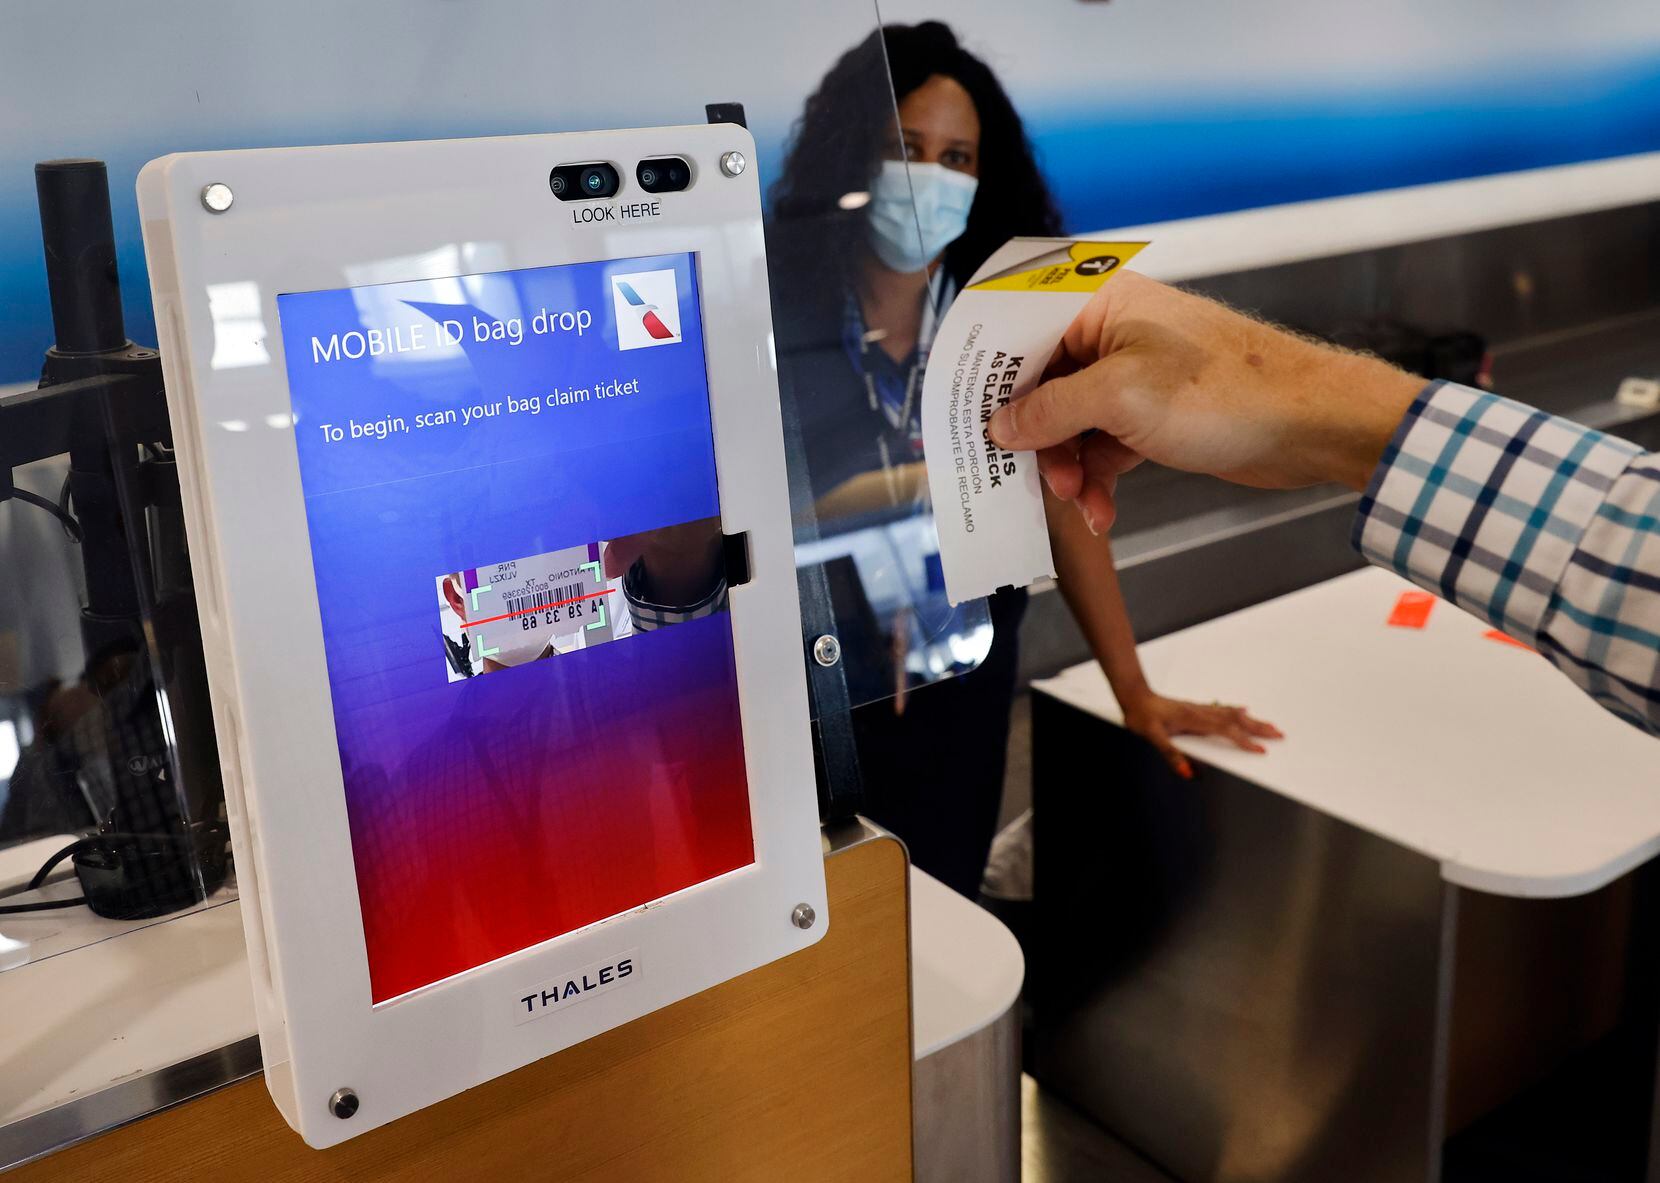 Travis Evenson, an American Airlines customer experience senior project manager, demonstrates how airline passengers use a new mobile ID bag drop, a touchless technology at DFW International Airport.